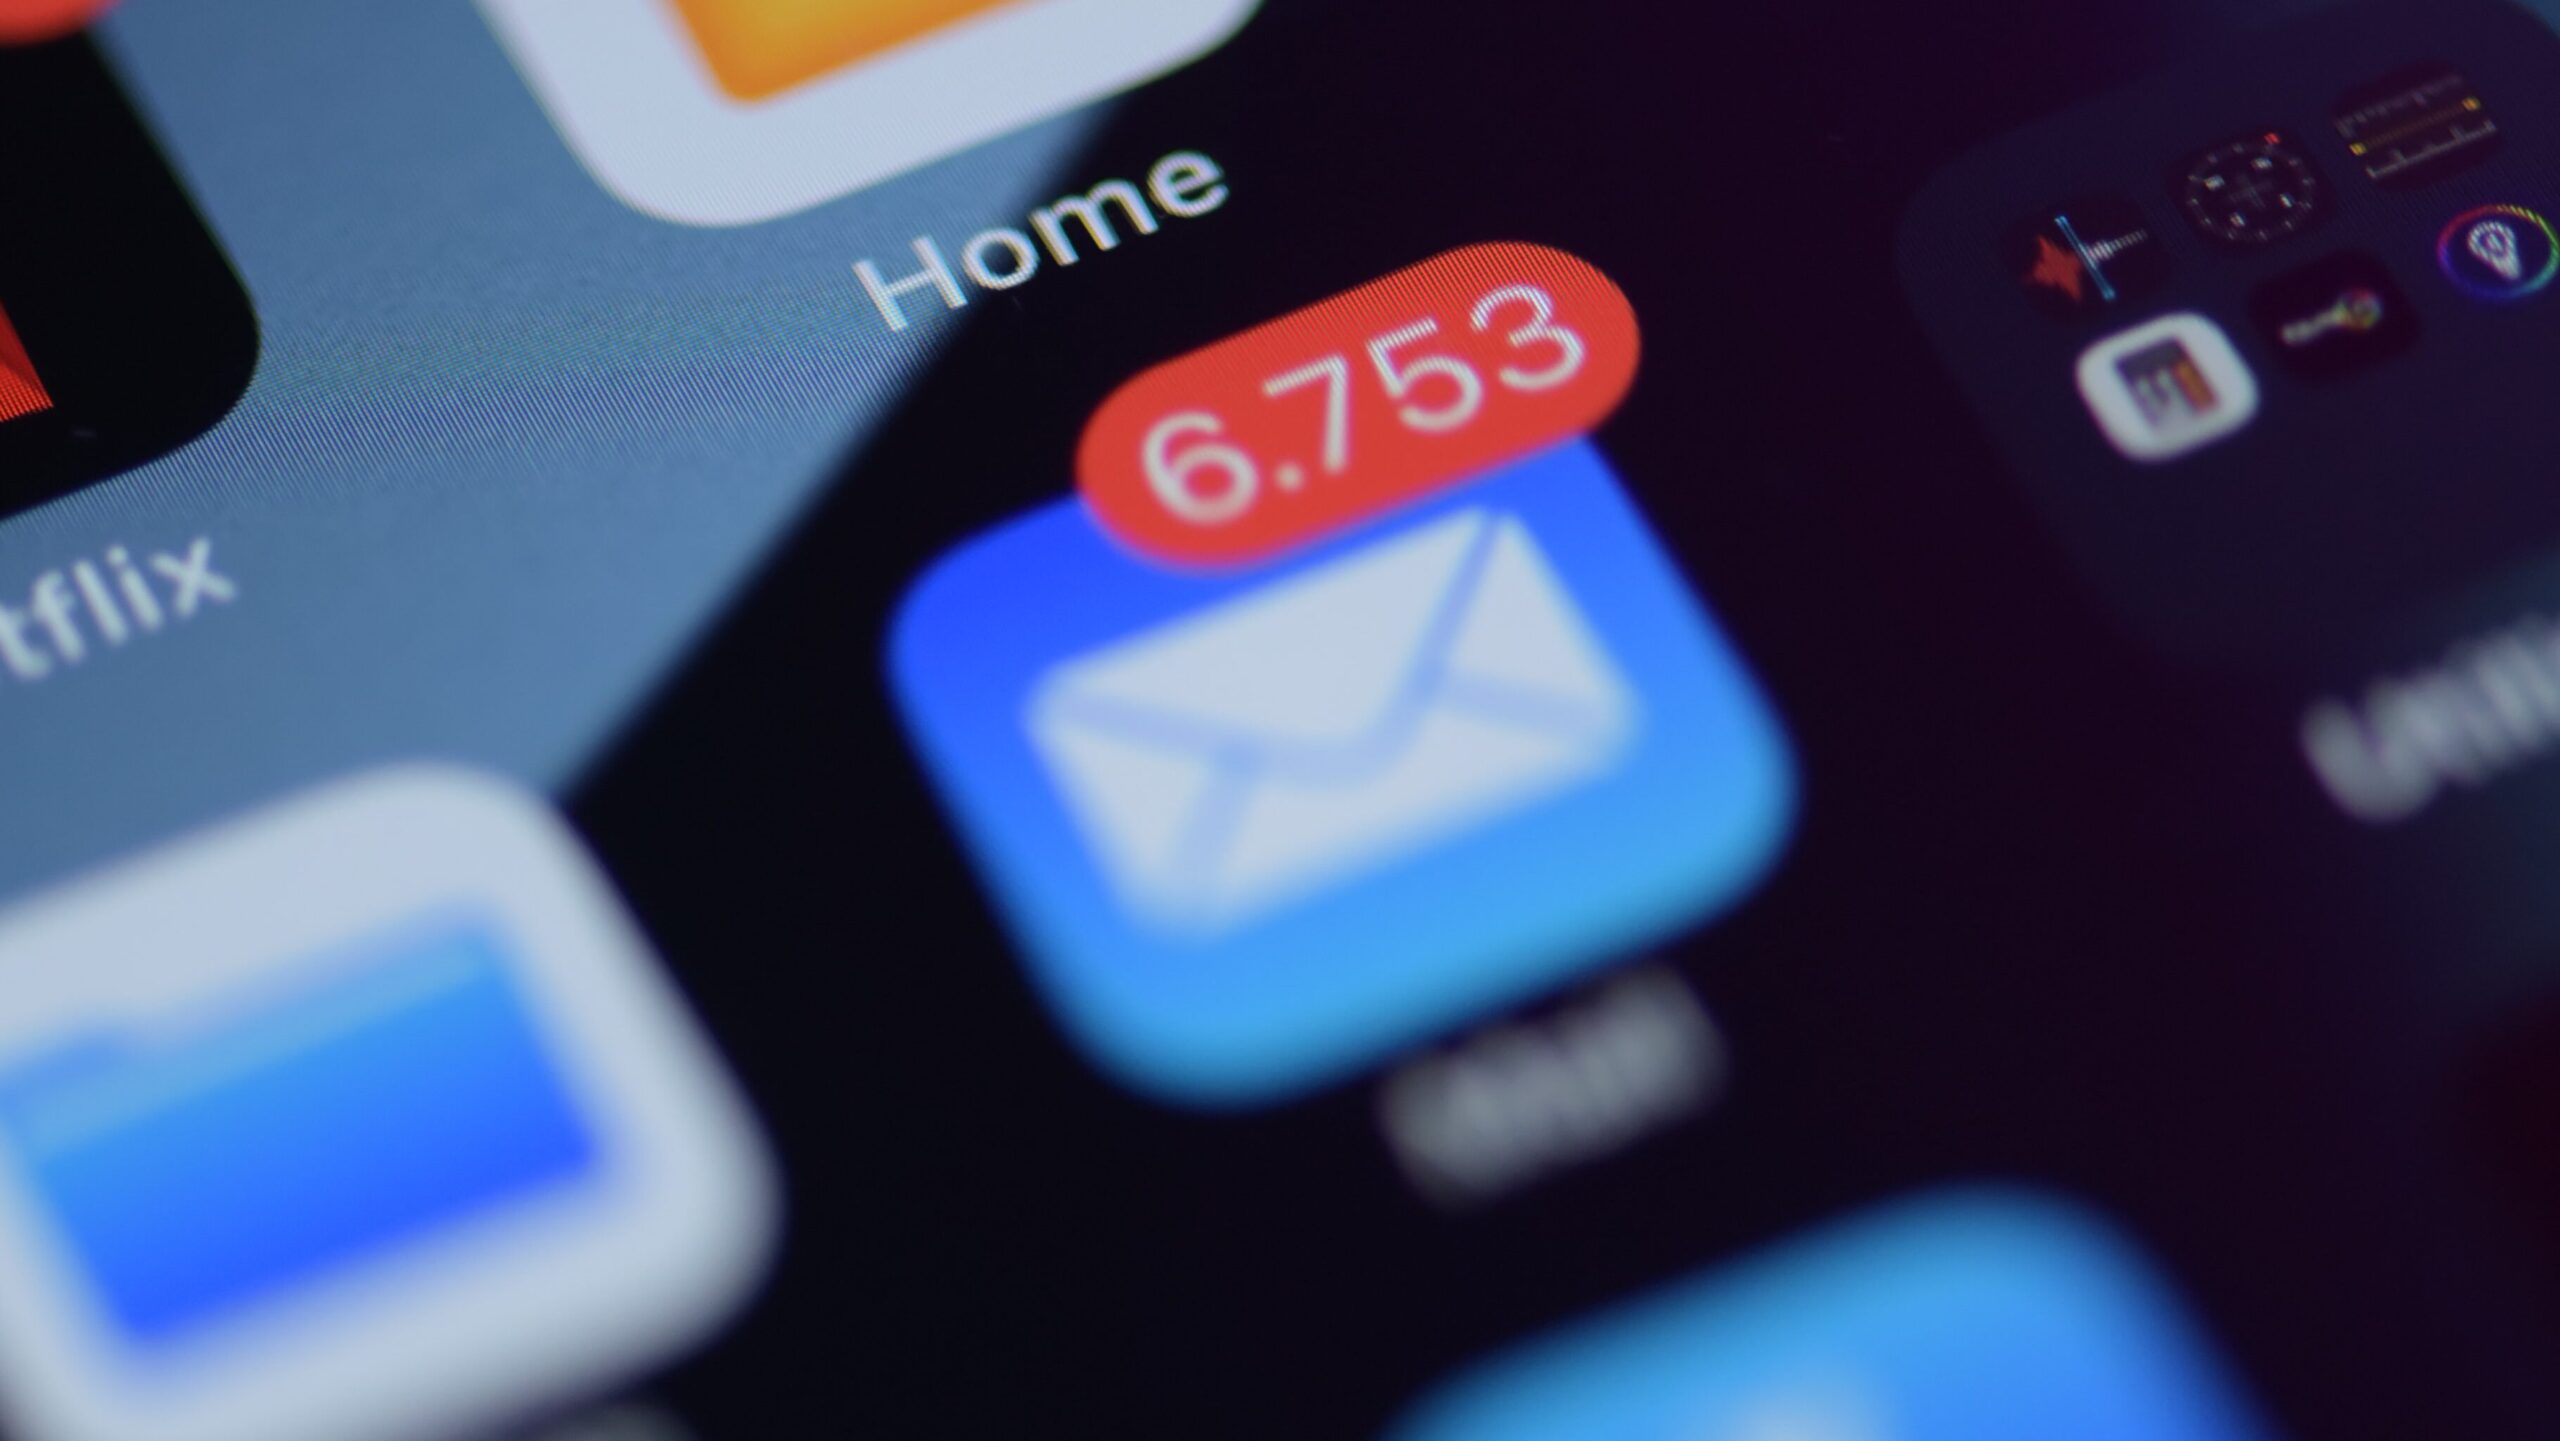 An email inbox on a smartphone appears full, which is likely to trigger a soft bounce.